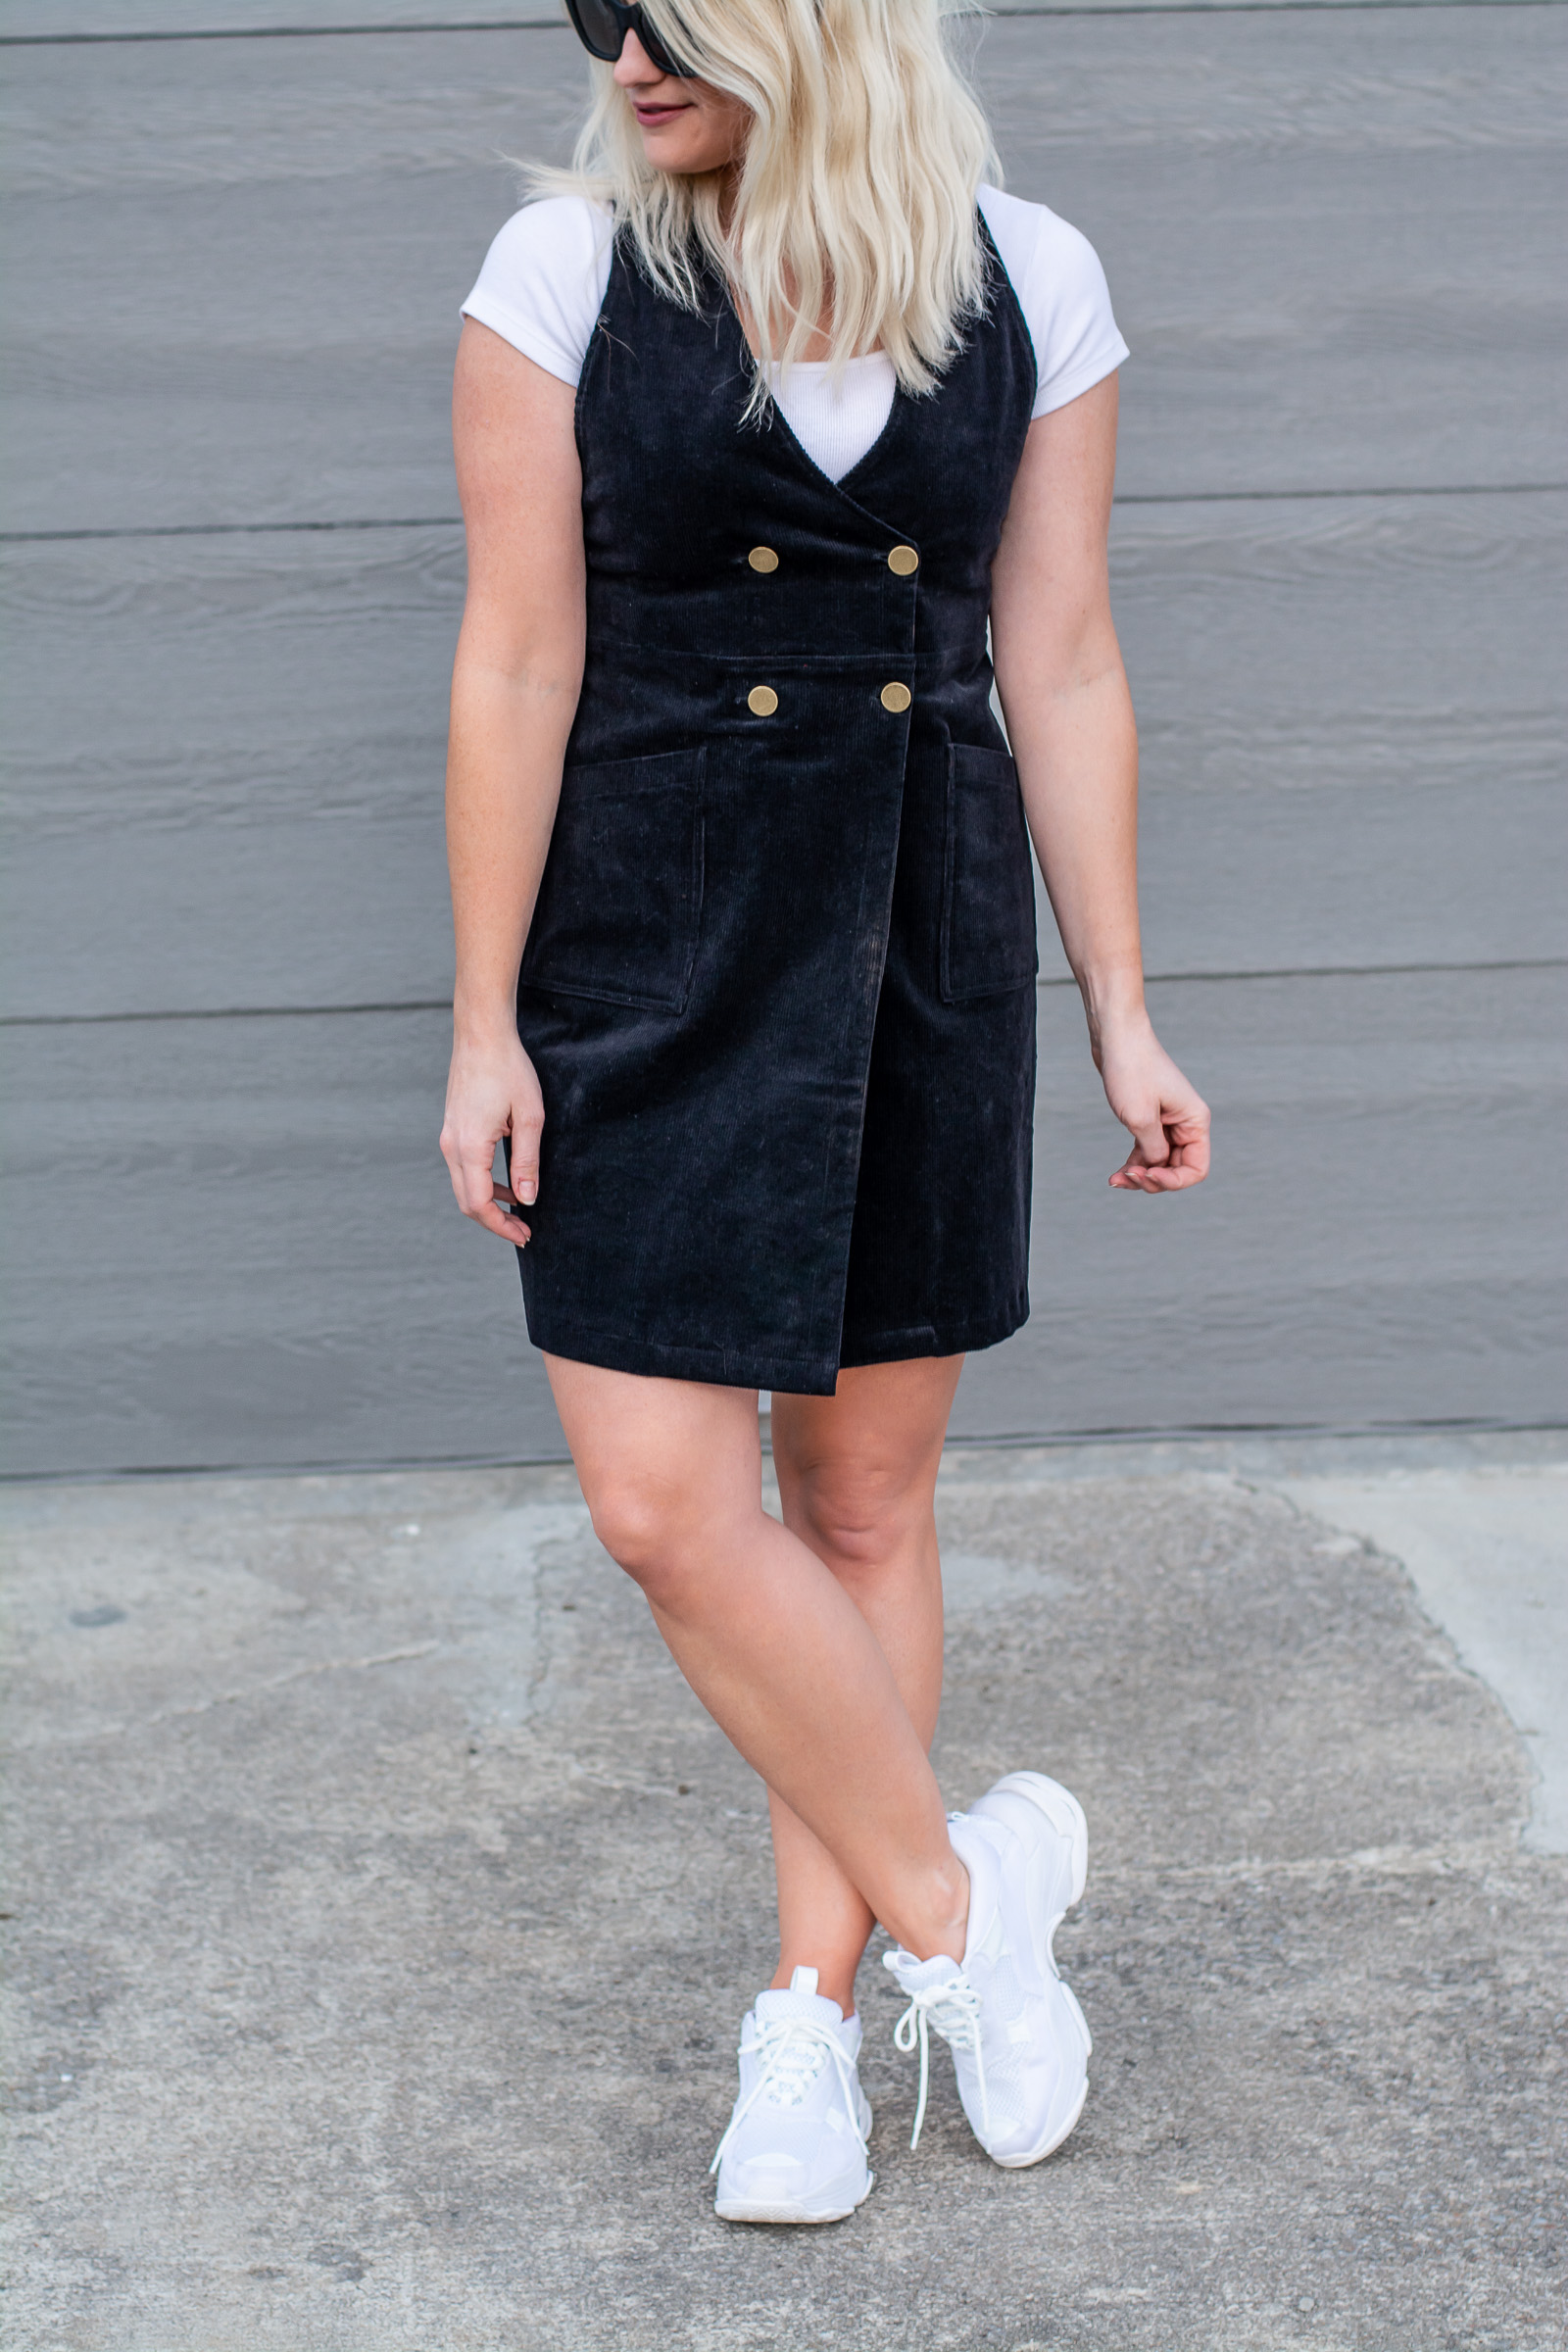 Sailor Girl Chic. | Ash from LSR